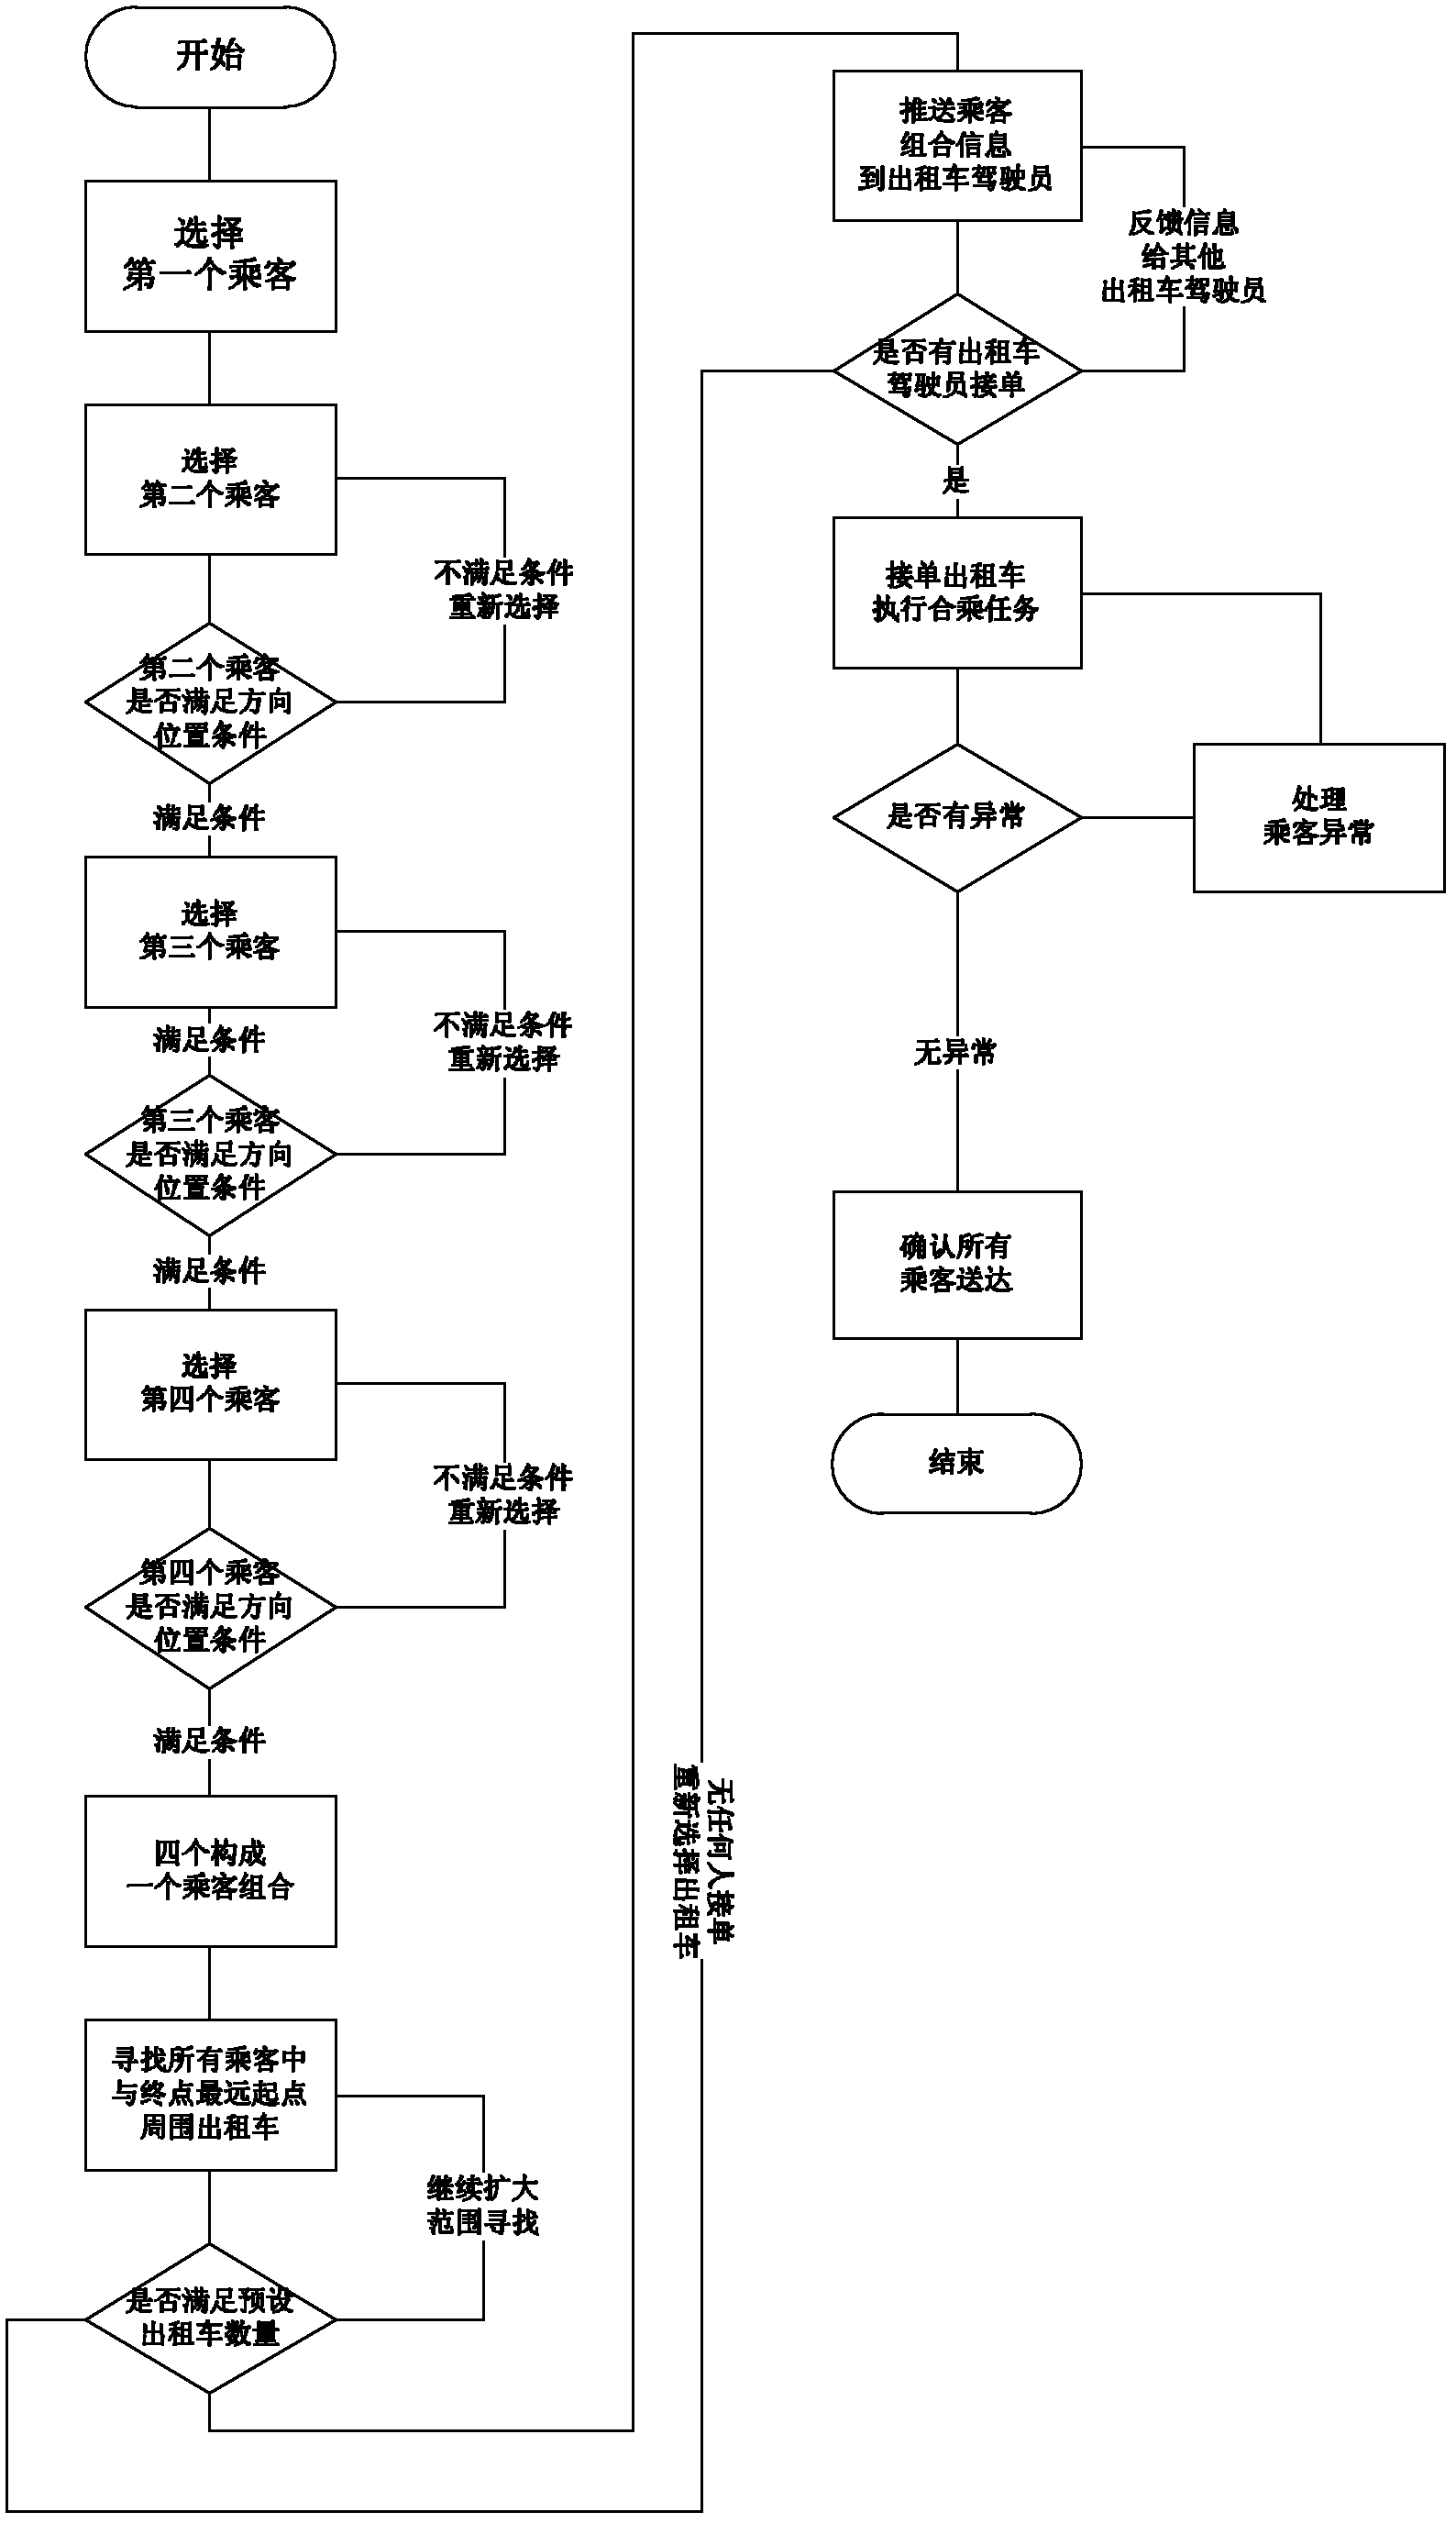 Control system and method for taxi sharing